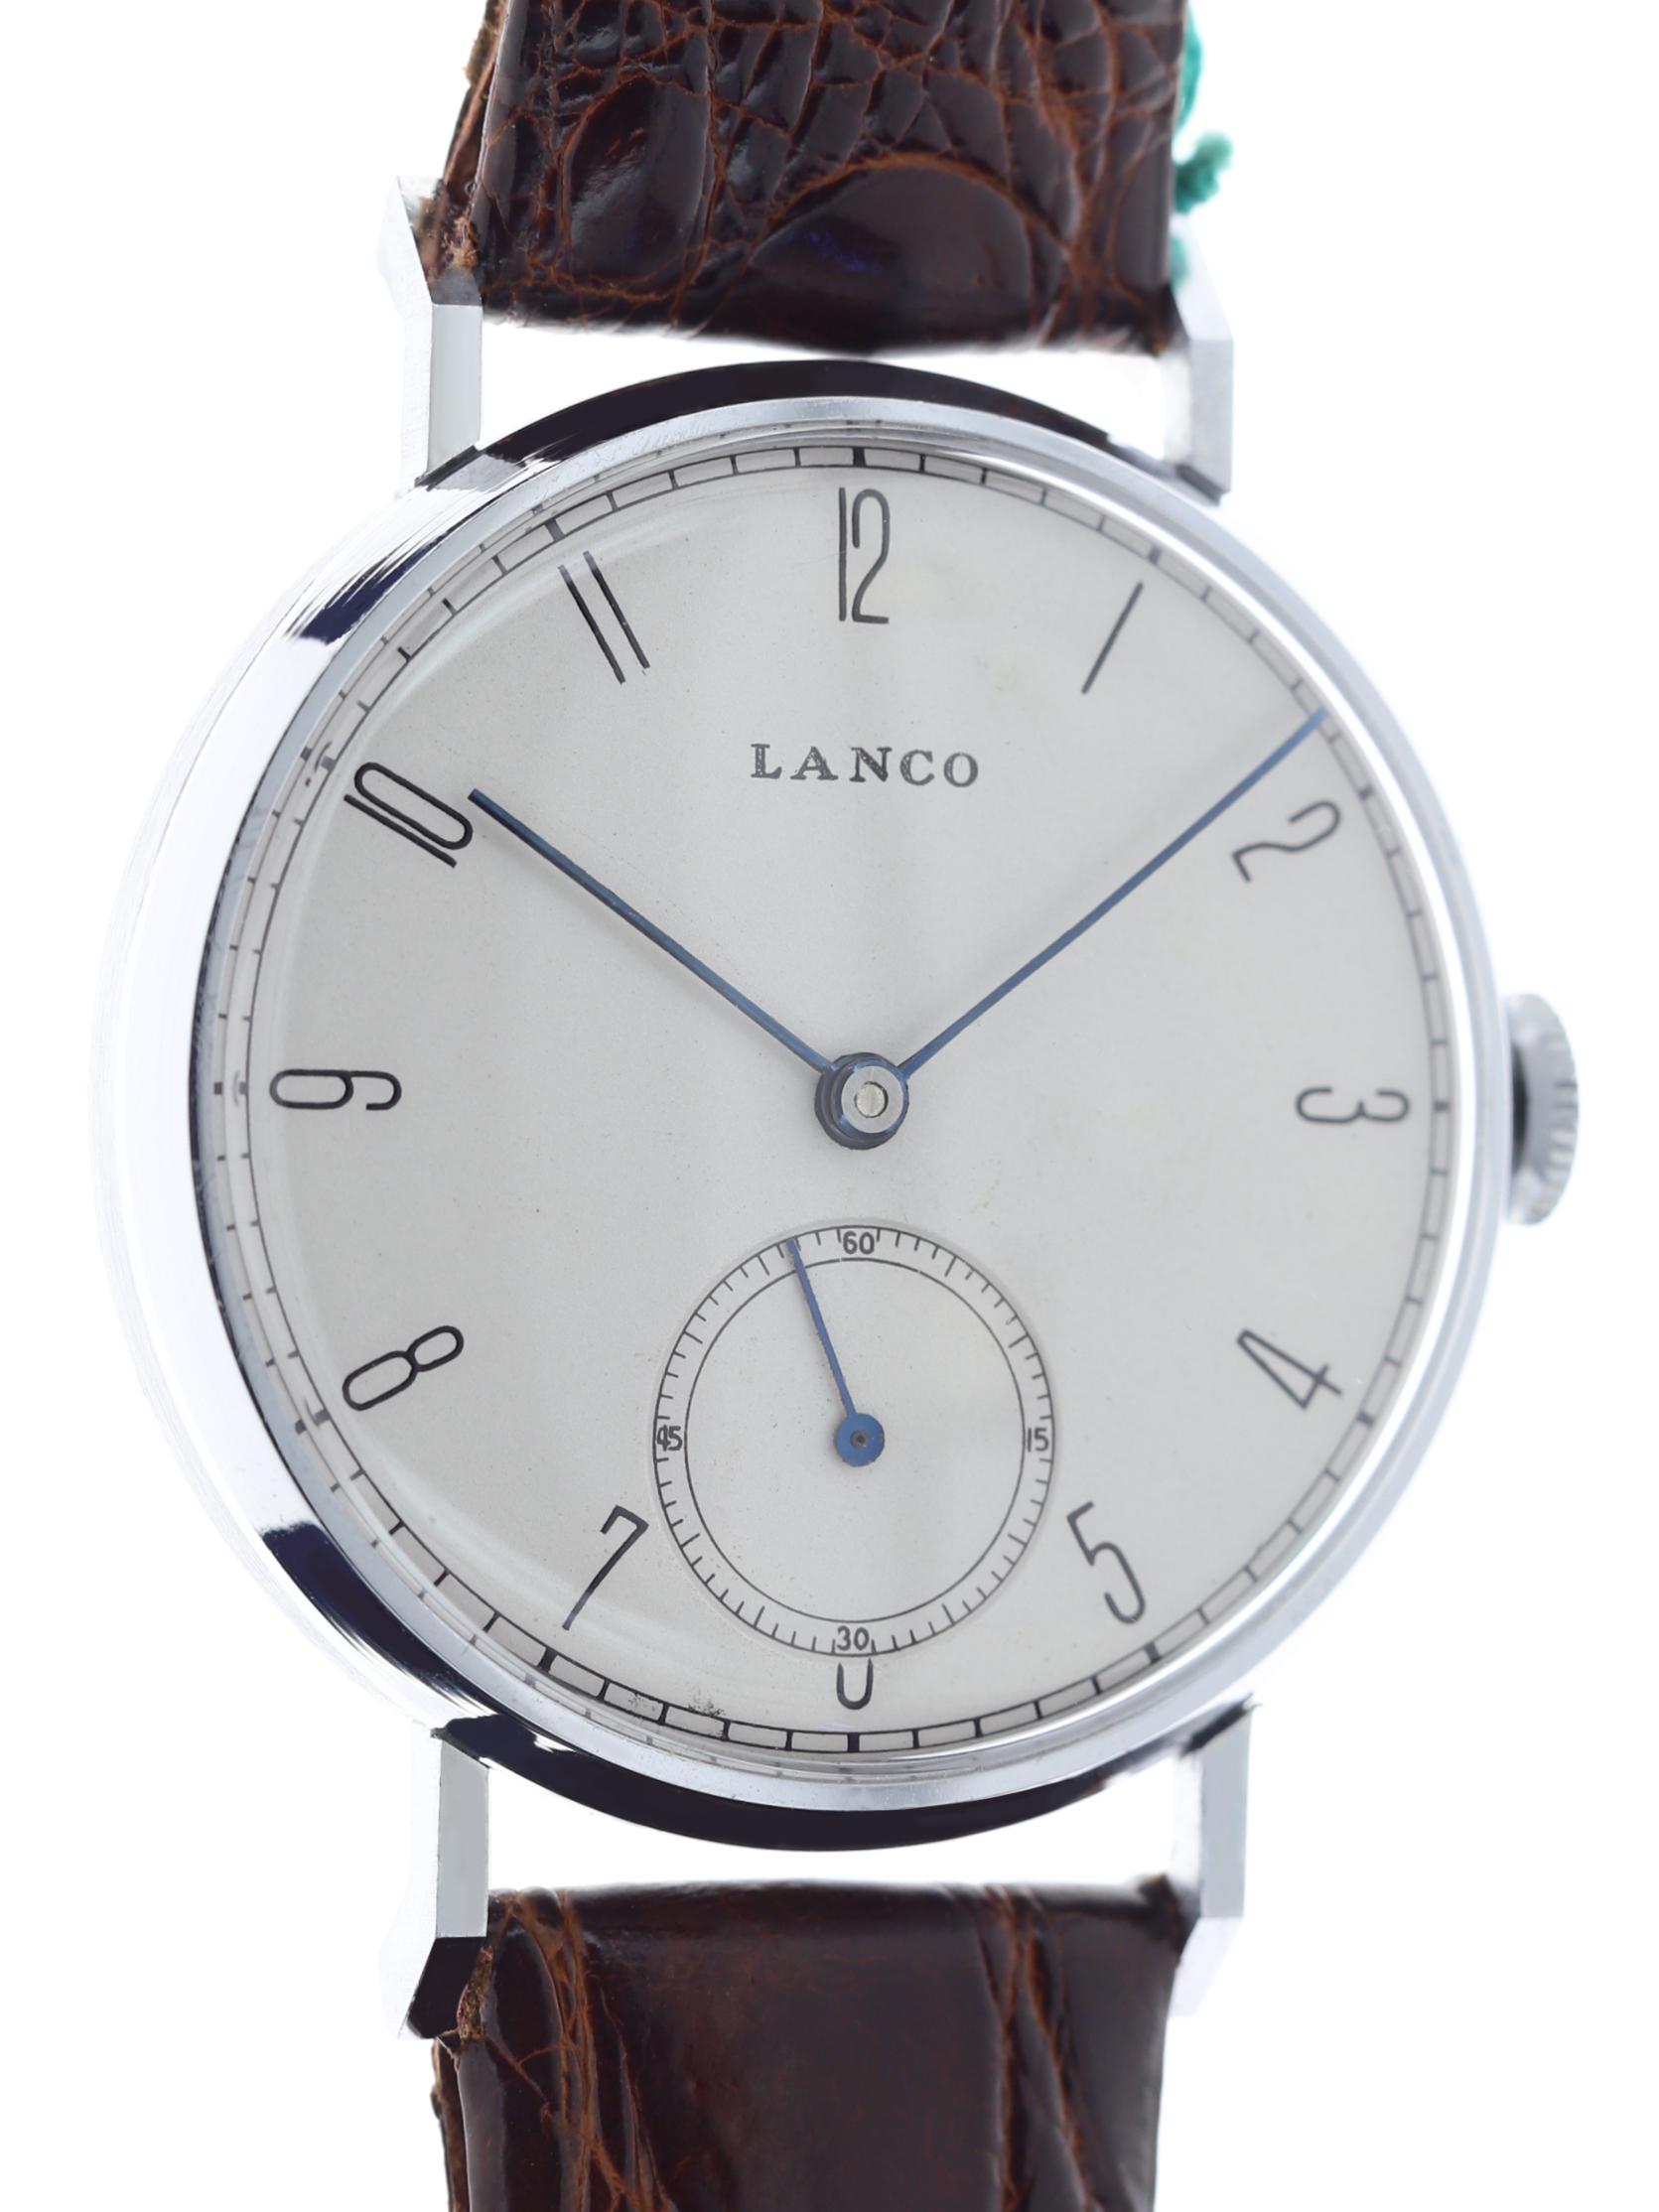 Lanco Mod.11 De Luxe for Rs.21,382 for sale from a Private Seller on  Chrono24